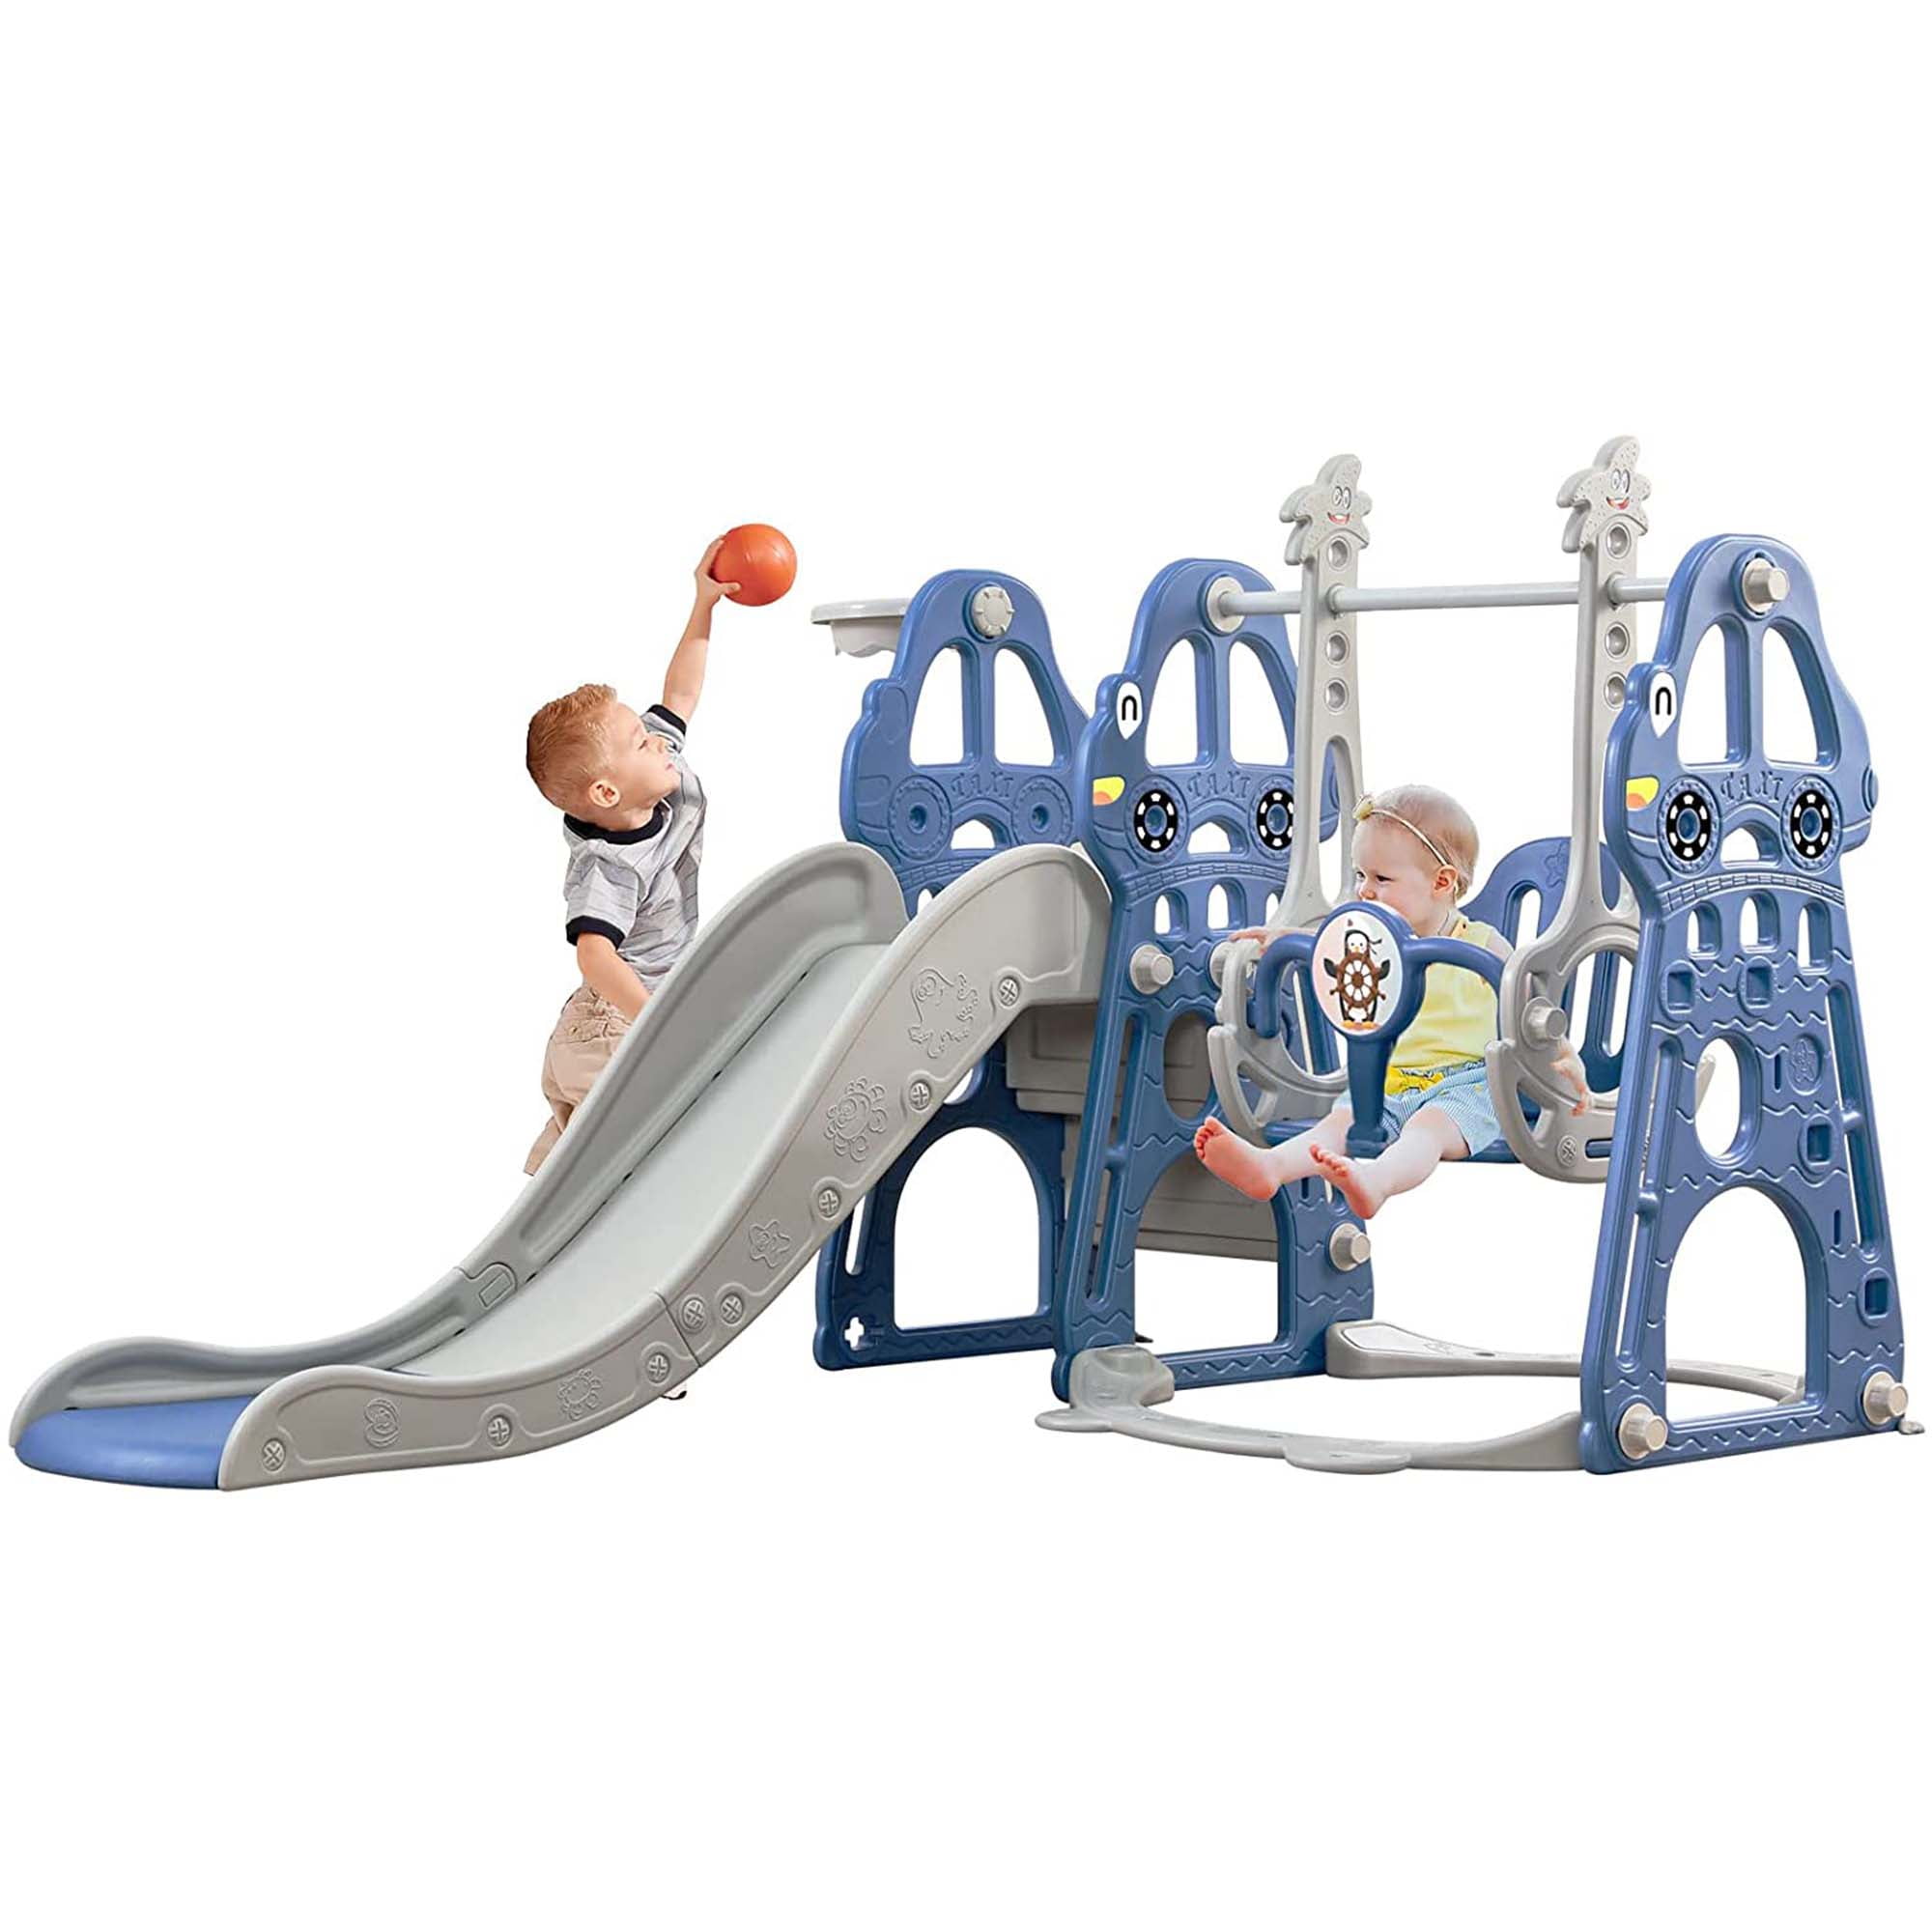 4-in-1 Slides for Kids Toddler Kids Children Slides and Climbers Indoor/Outdoor Slide Garden Slide with Basketball Hoop Perfect Toy Gift Gym for Boys & Girls 3-8 Years Old 